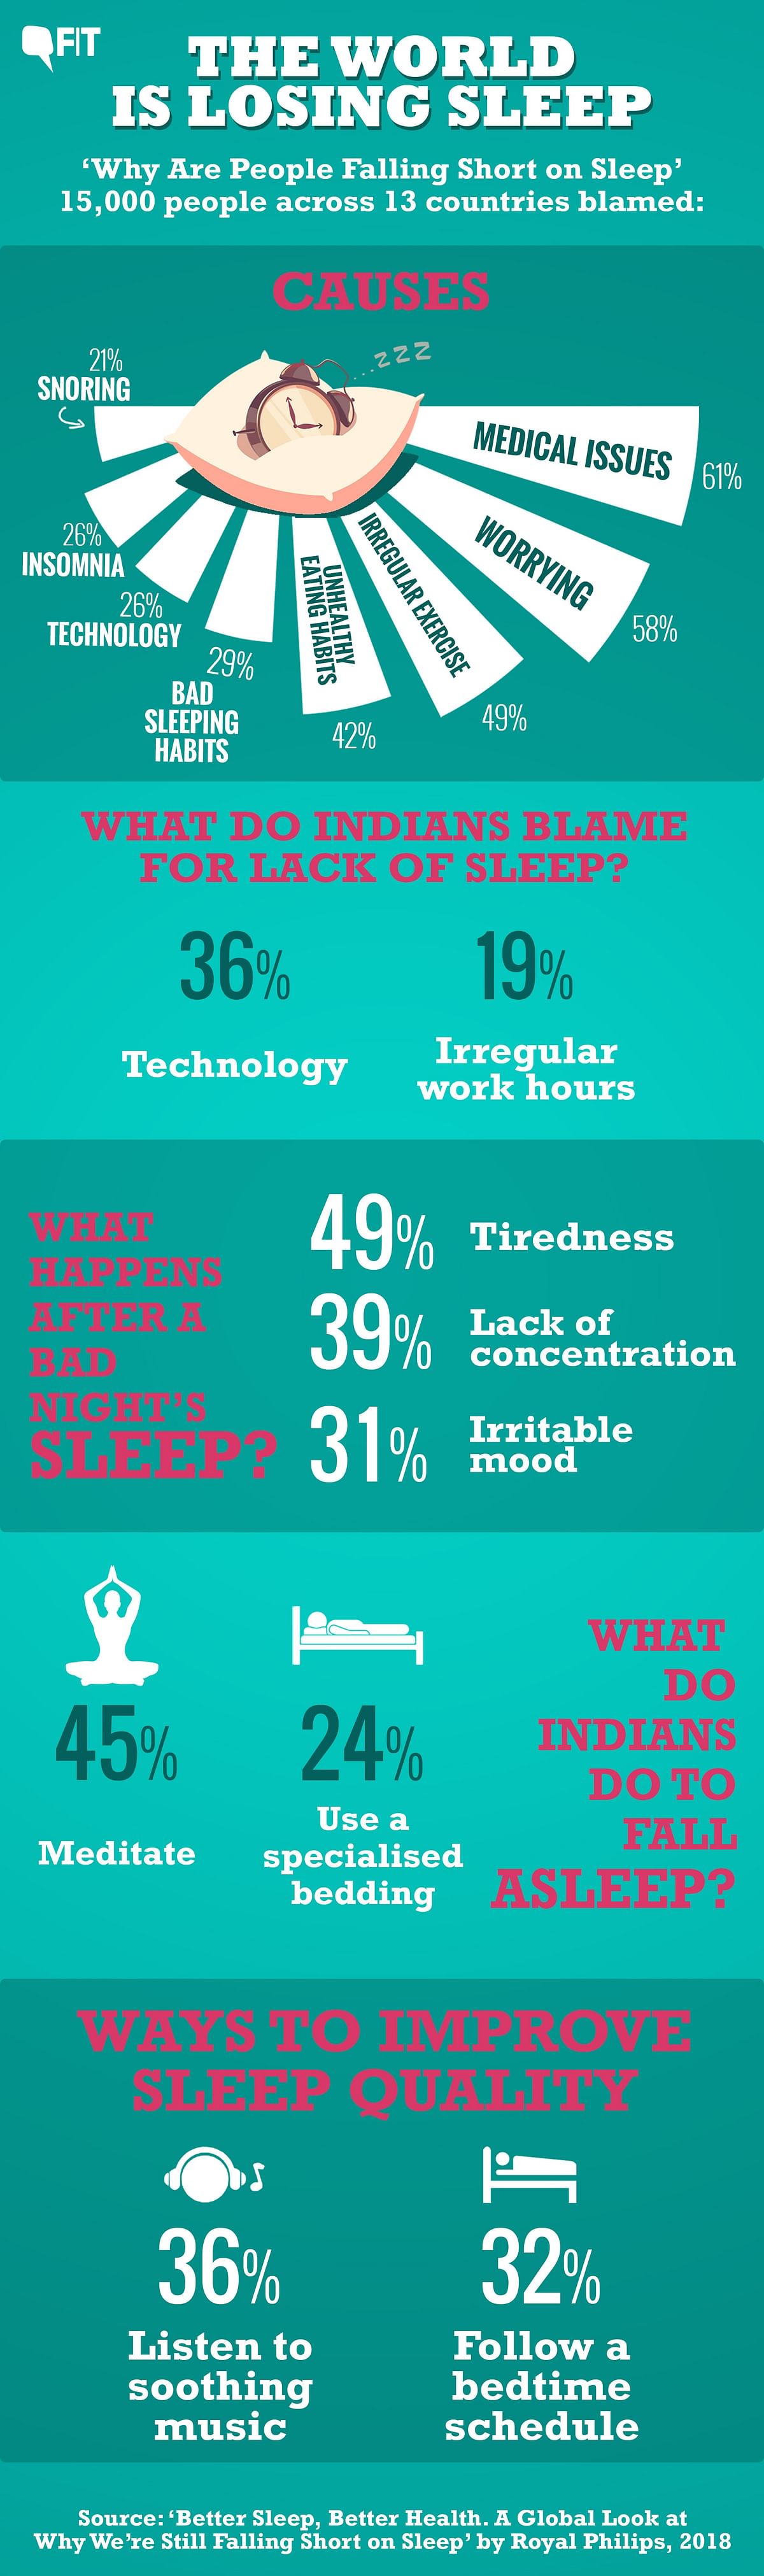 For World Sleep Day, a global sleep survey looked at what keeps people from getting their optimal night’s rest.